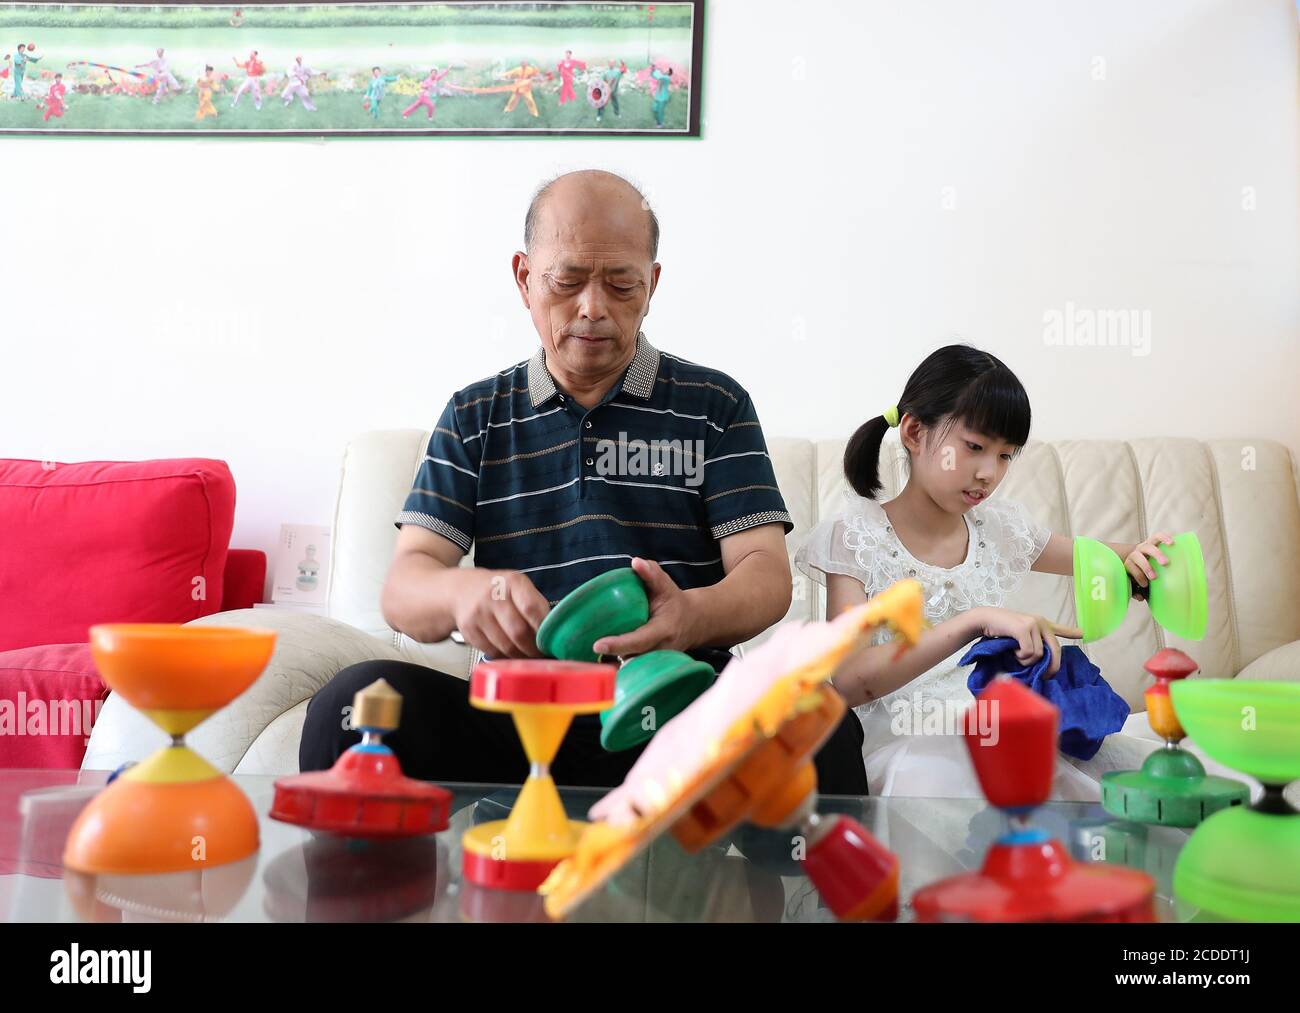 (200828) -- BEIJING, Aug. 28, 2020 (Xinhua) -- Dong Shulin (L) and his granddaughter Dong Yutong clean and fix diabolos at home in Beijing, capital of China, Aug. 11, 2020. Dong Shulin, 66, lives with his wife Mei Yongpei and his 9-year-old granddaughter Dong Yutong in Beijing. Dong Shulin started to play diabolo in 2003 and now the whole family are fond of playing this traditional folk game, in which one can throw and catch a spinning top by moving a cord fastened to two sticks. In Dong Shulin's home, over 70 diabolos were placed all around. Some of the diabolos were purchased and others were Stock Photo